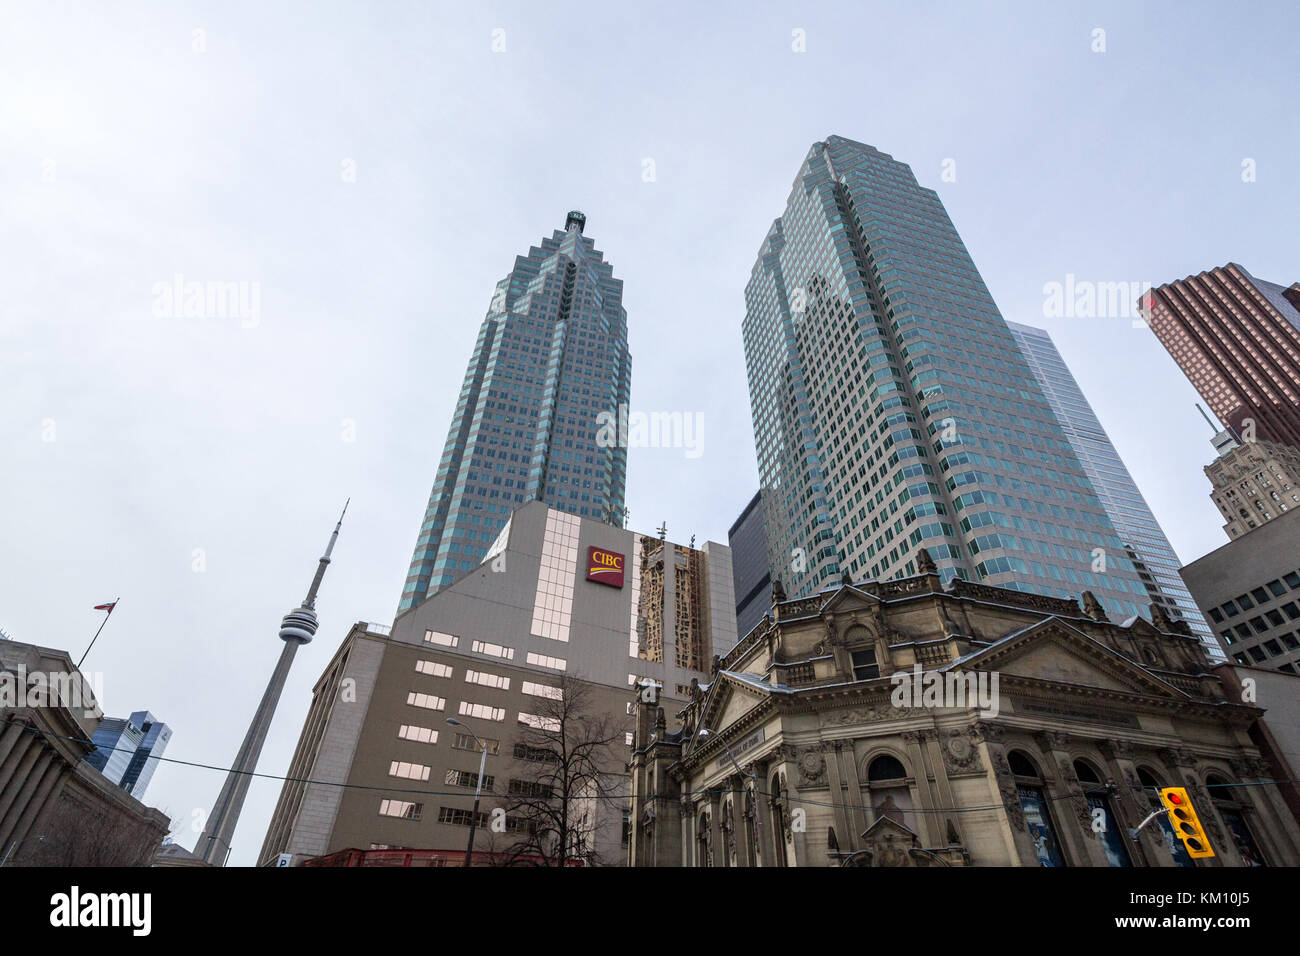 TORONTO, CANADA - DECEMBER 31, 2016: CIBC center with the CN Tower in background in the center of Toronto. CIBC, or Canadian Imperial Bank of Commerce Stock Photo